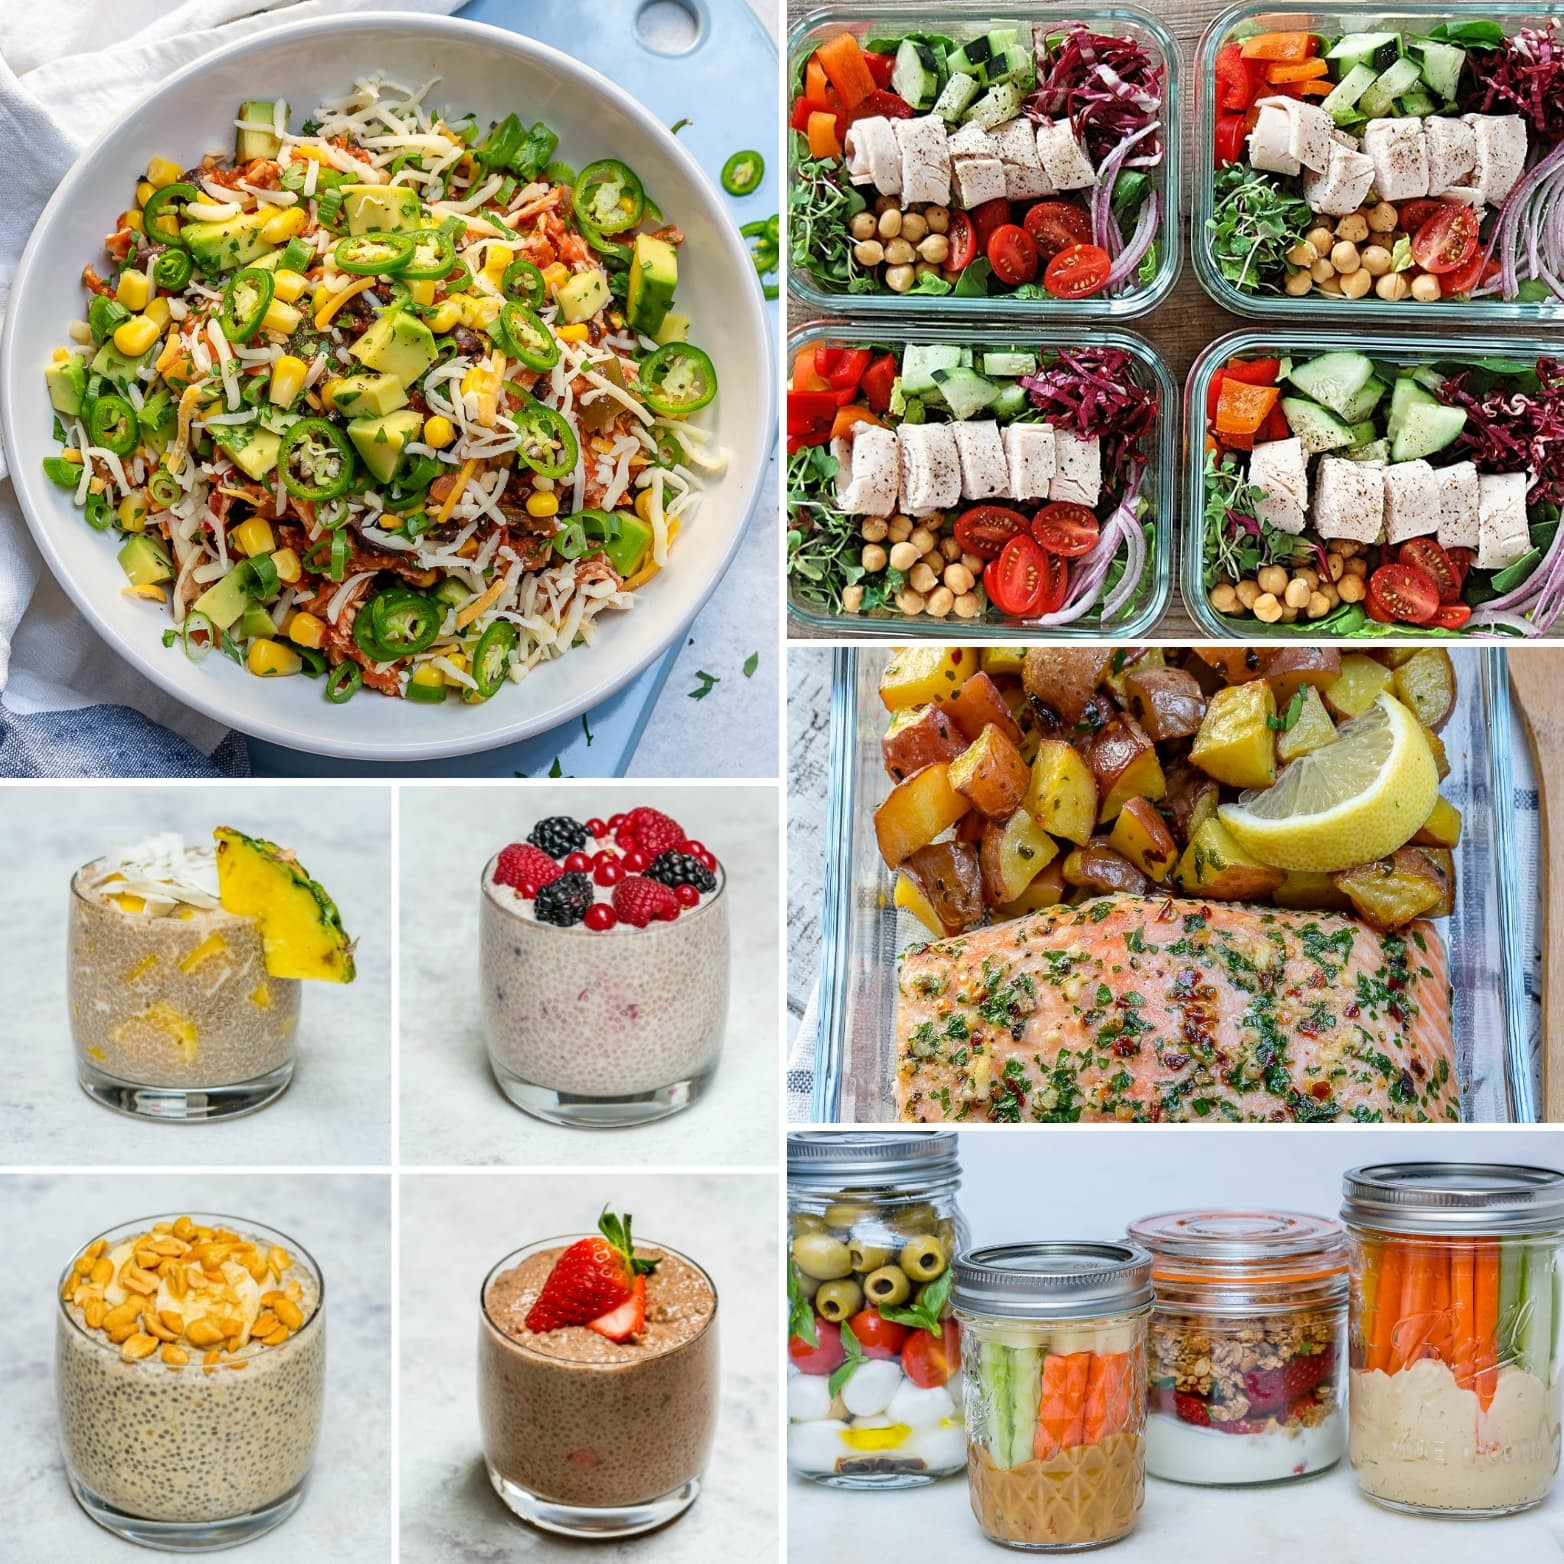 Clean Eating Meal Prep Recipes
 10 Top Clean Eating Meal Prep Recipes of 2018